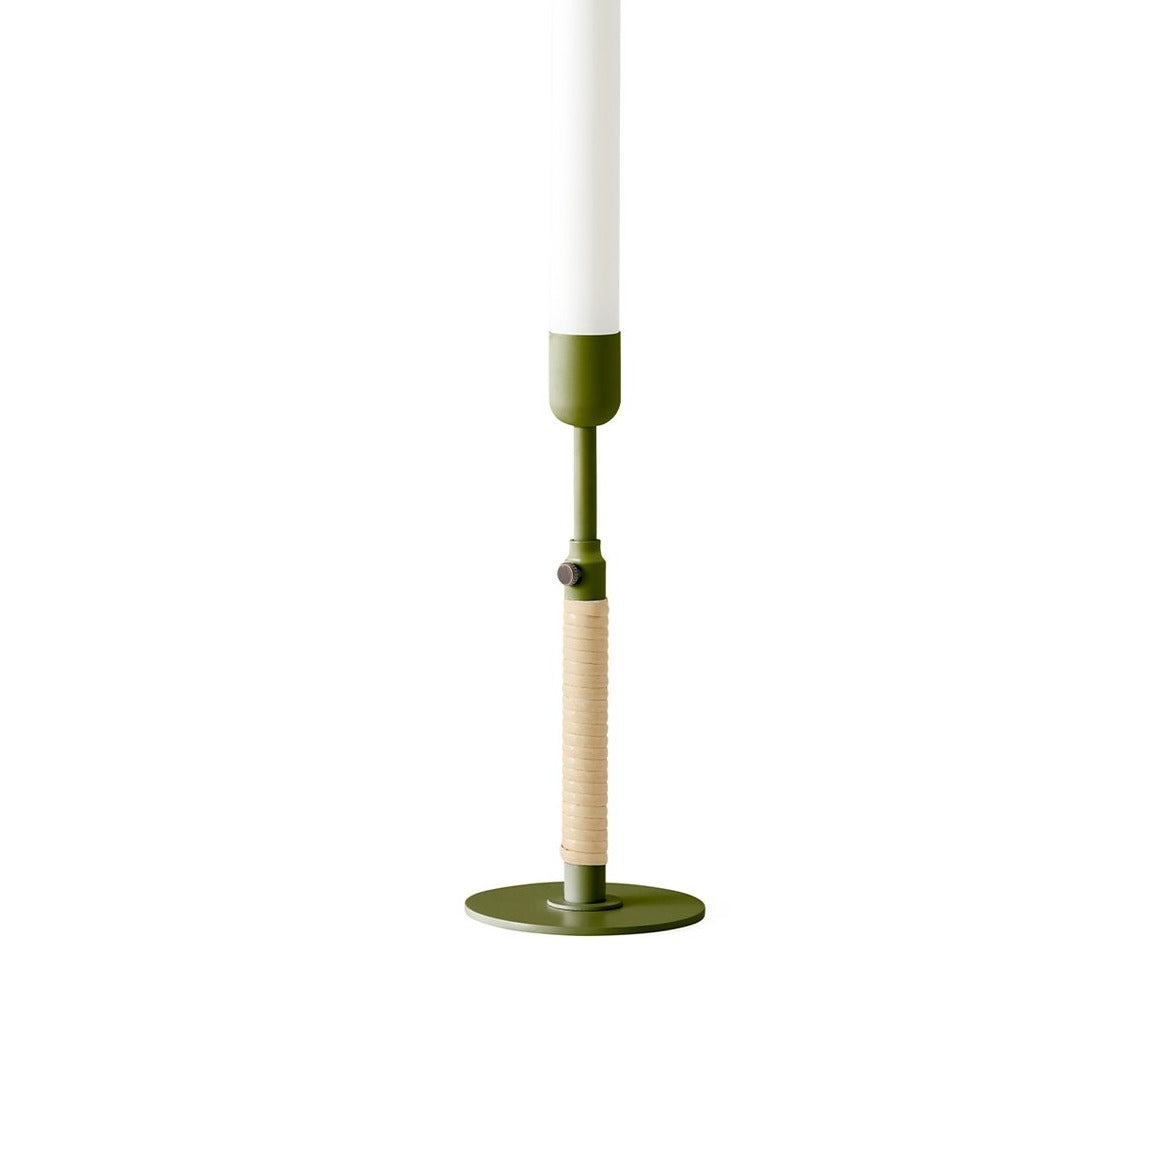 Audo Duca Candle Holder - Olive Green